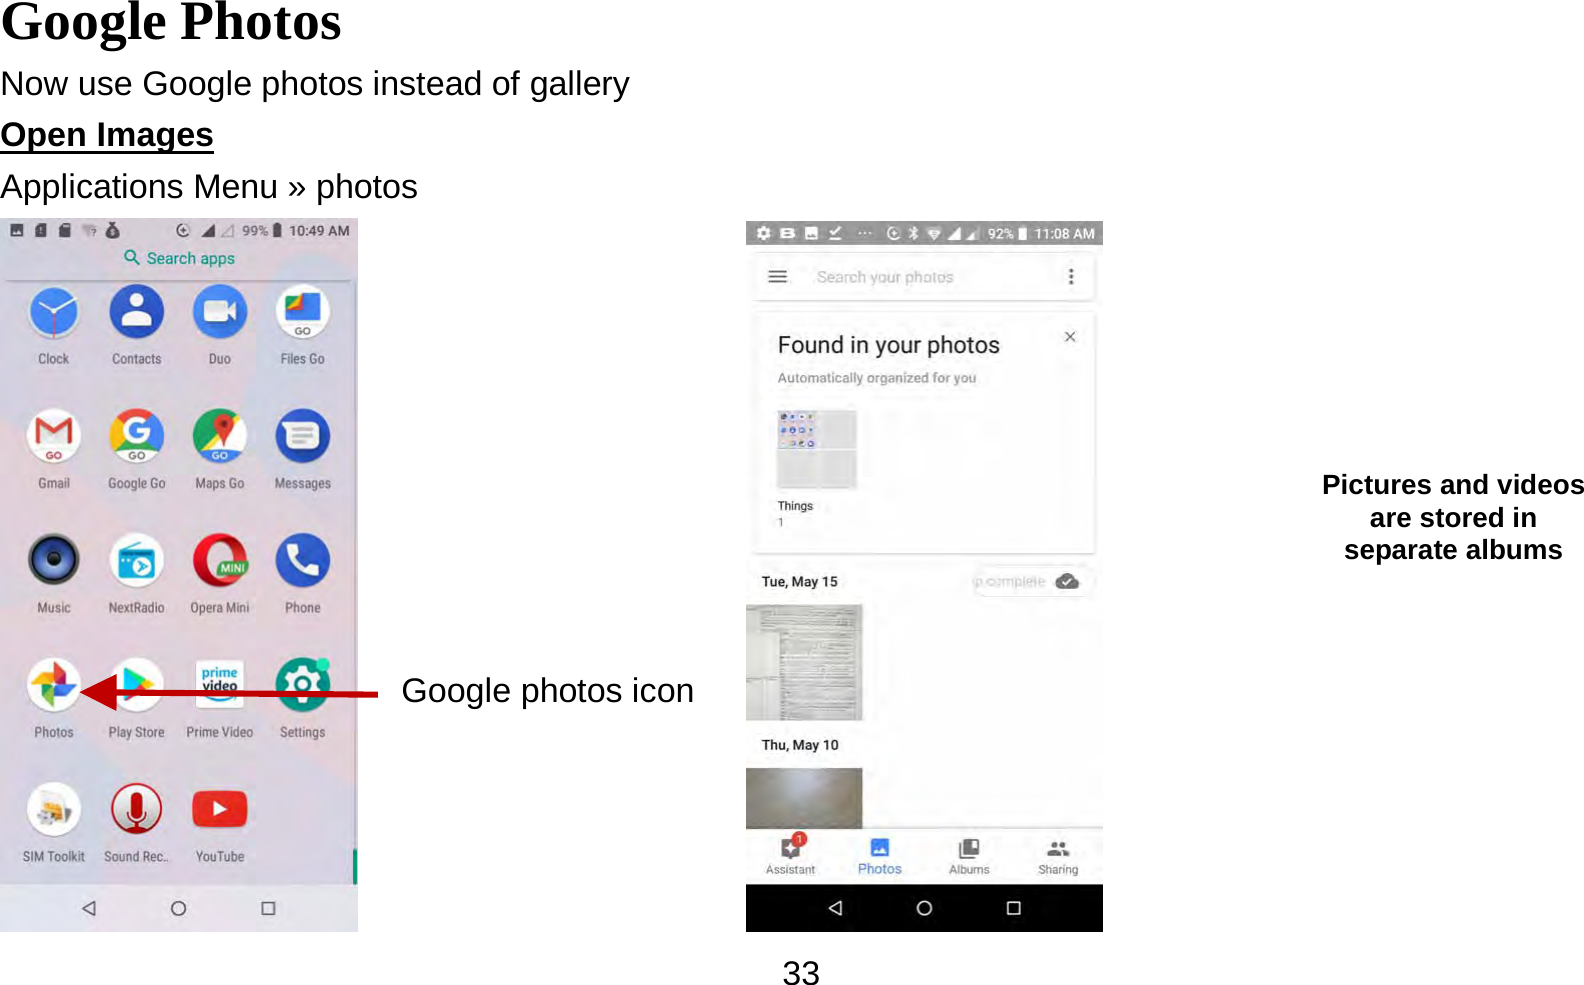   33Google Photos                                        Now use Google photos instead of gallery Open Images                                                                                      Applications Menu » photos                 Pictures and videos are stored in separate albums Google photos icon 